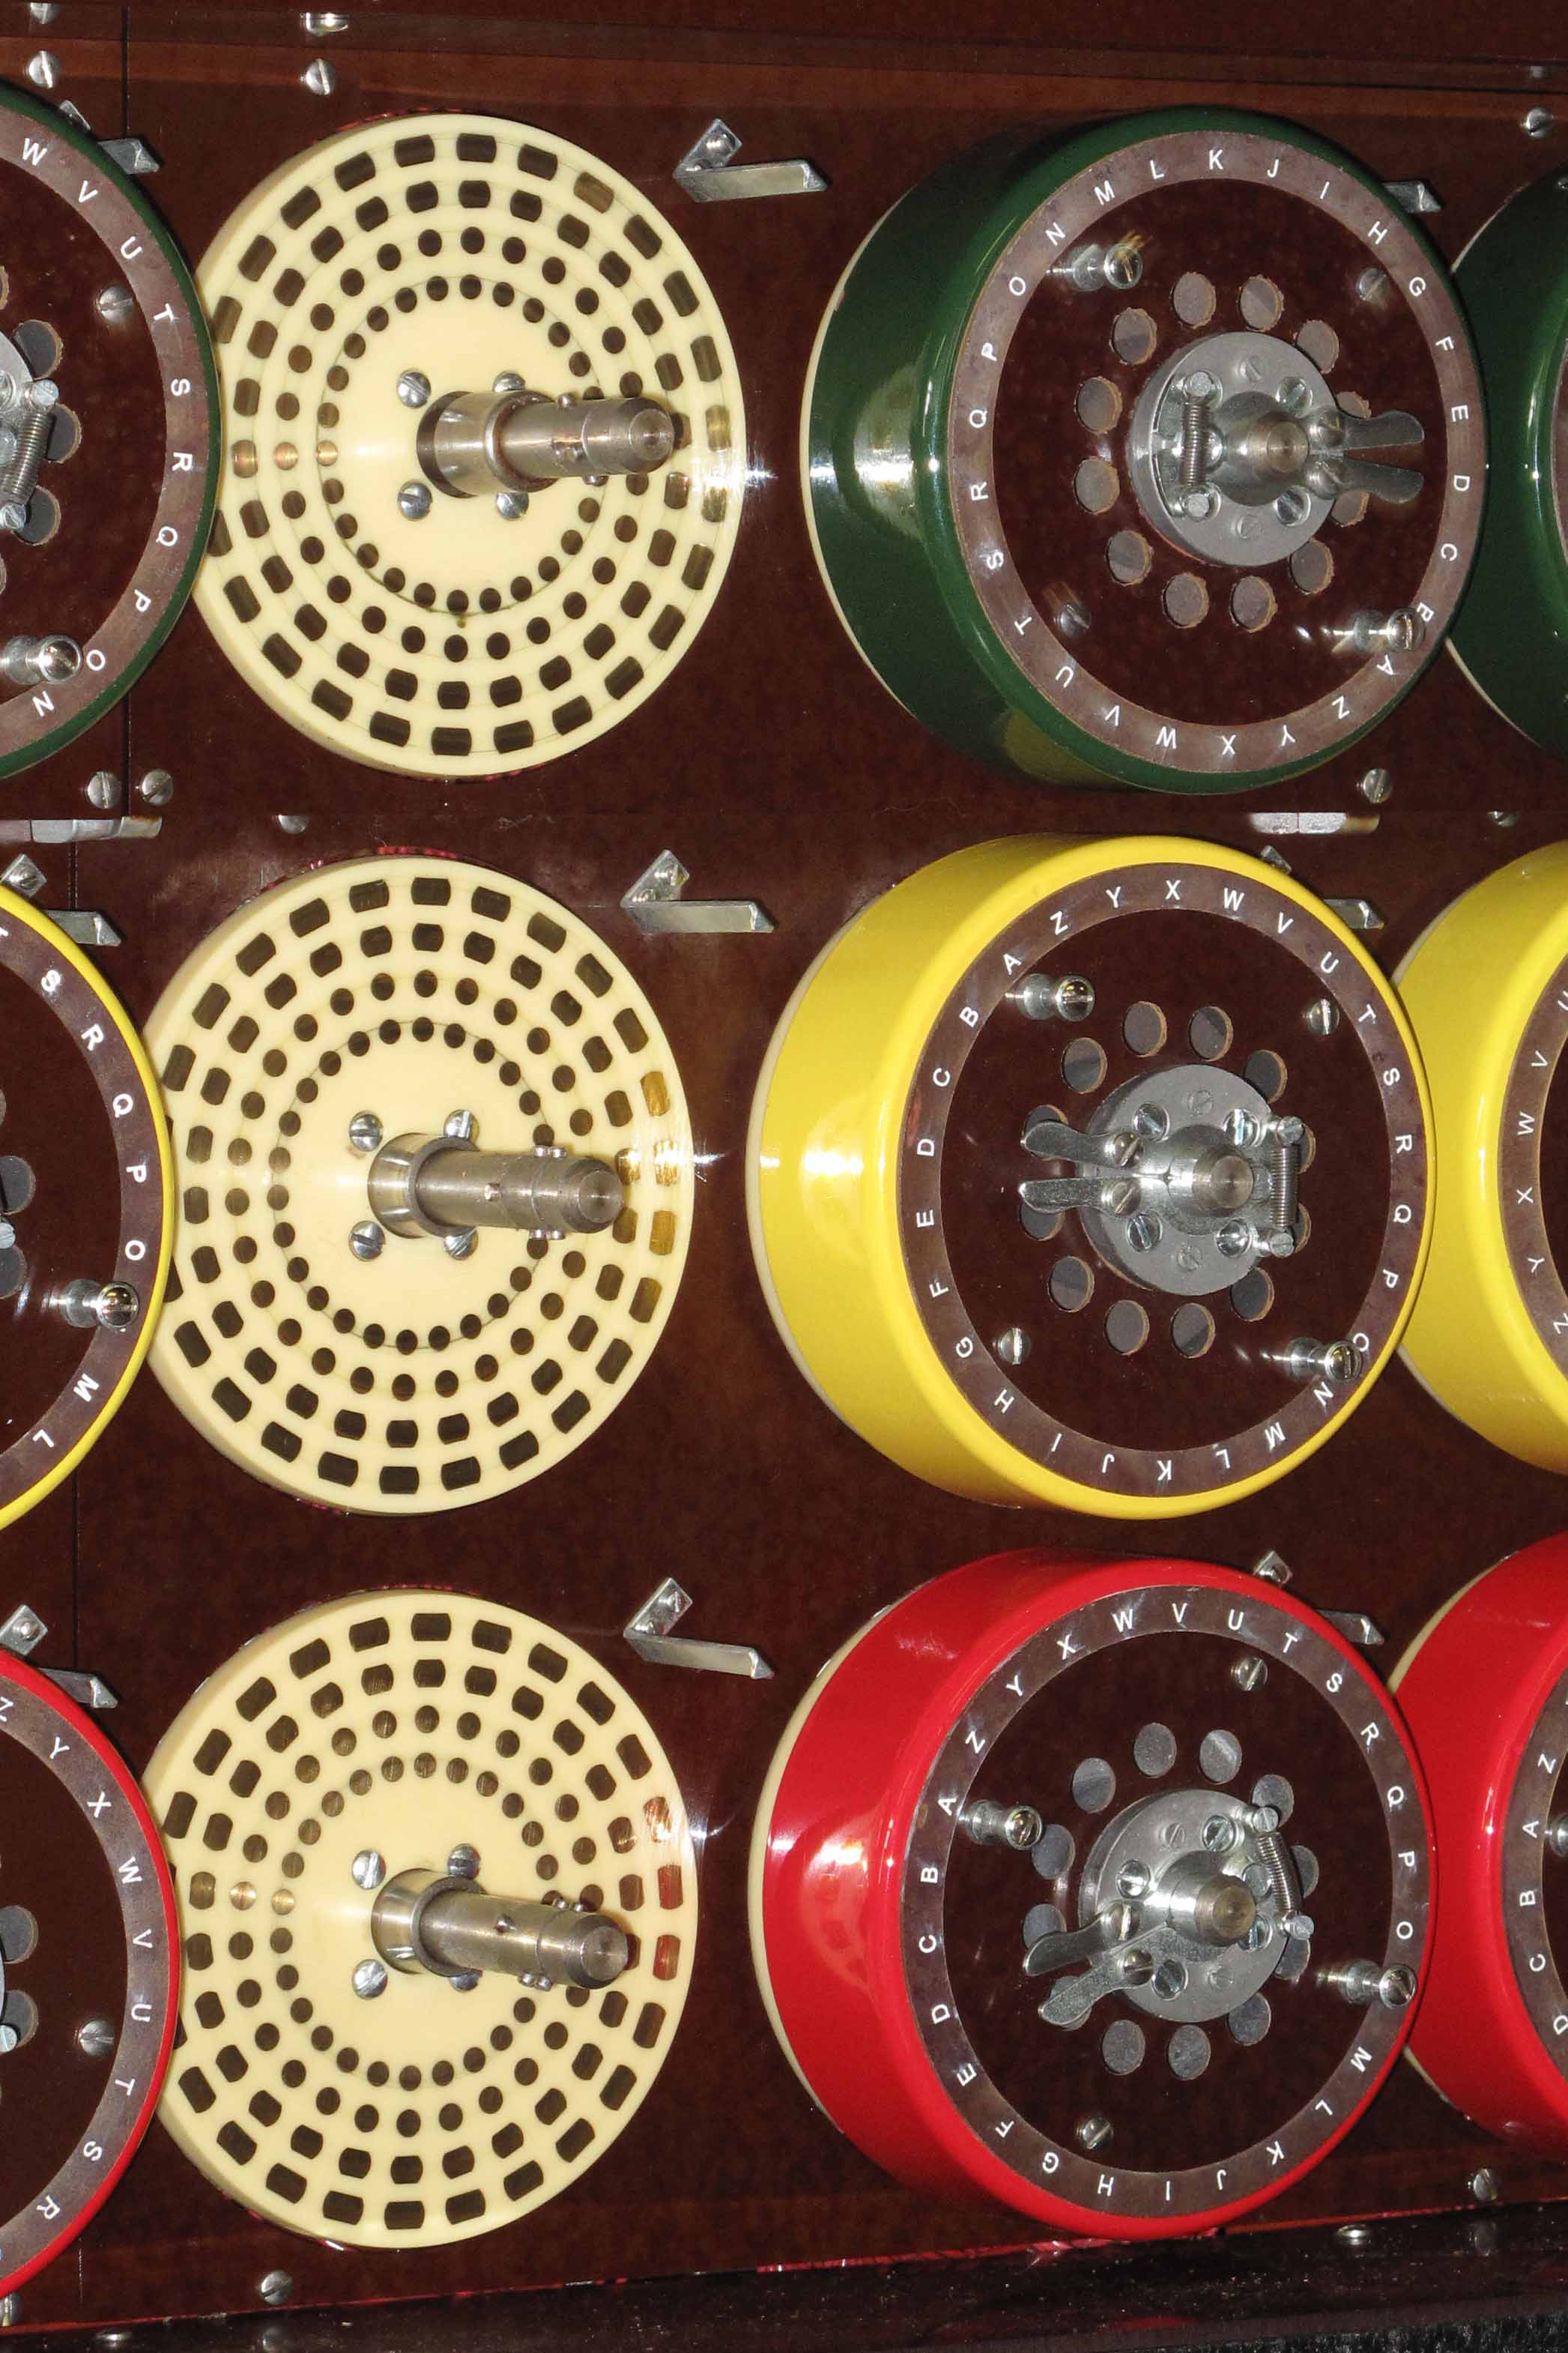 A closeup of 3 red, yellow and green drums on bombe.